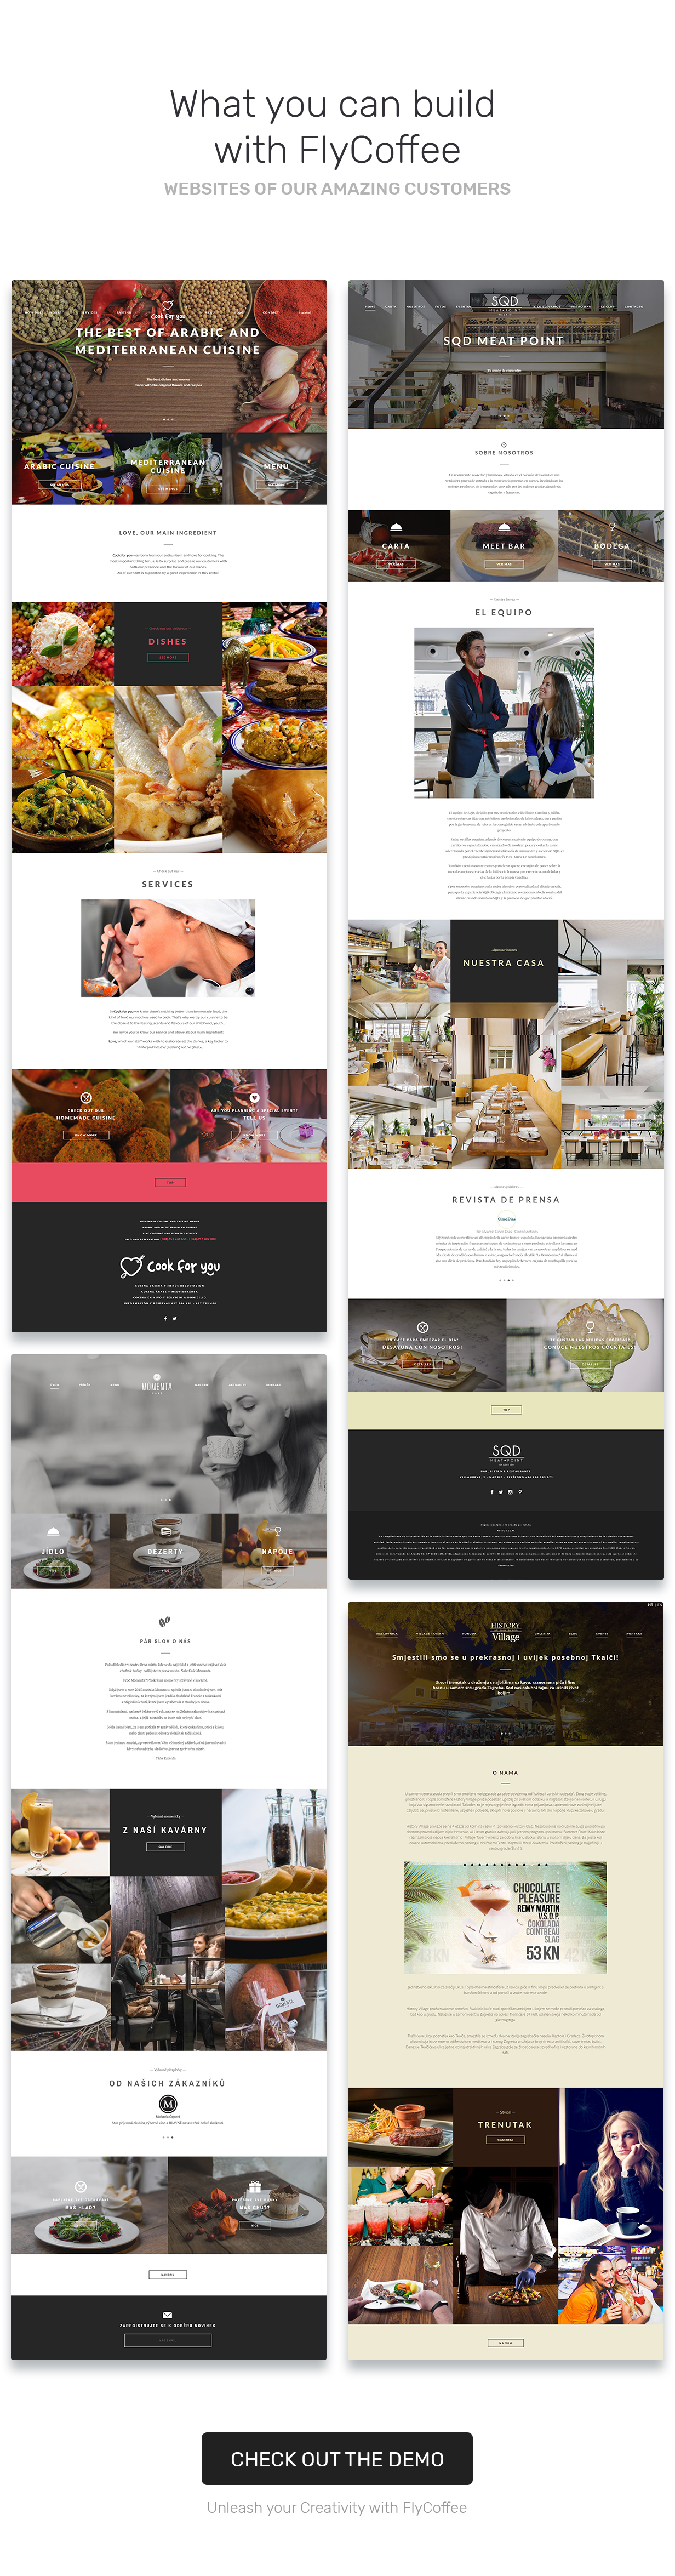 FlyCoffee Shop - Responsive Cafe and Restaurant WordPress Theme - 6